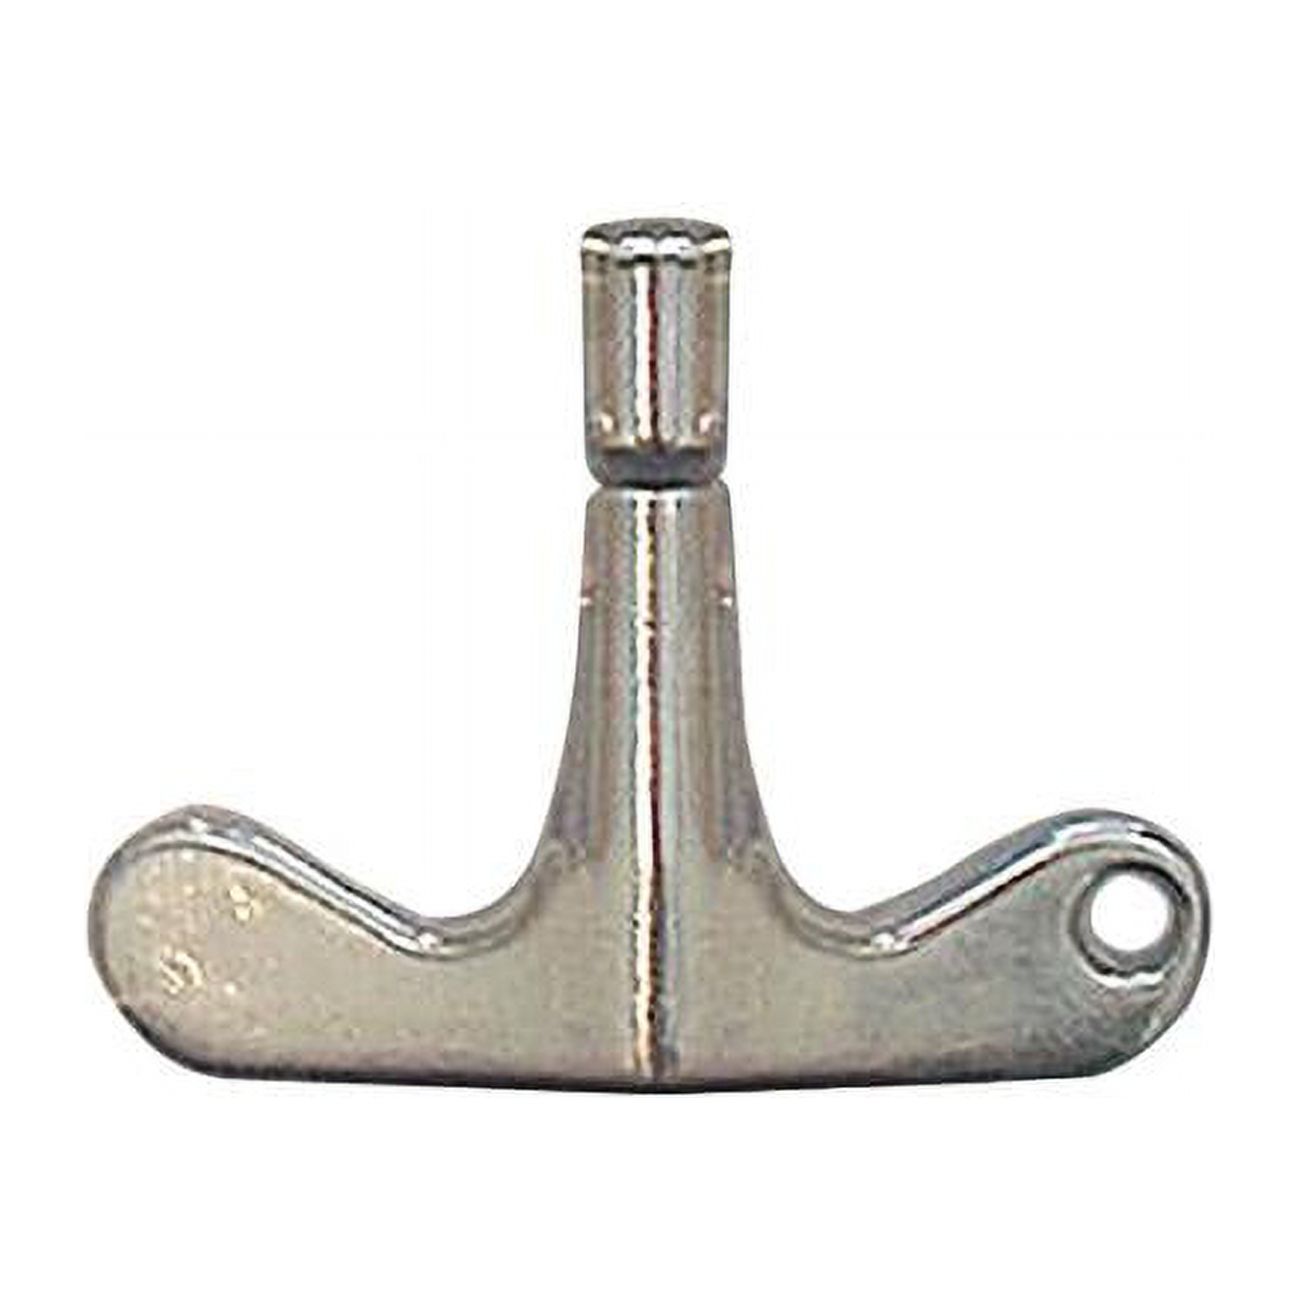 Percussion Plus Drums 775754 Drum Key with Chain Hole - image 1 of 1